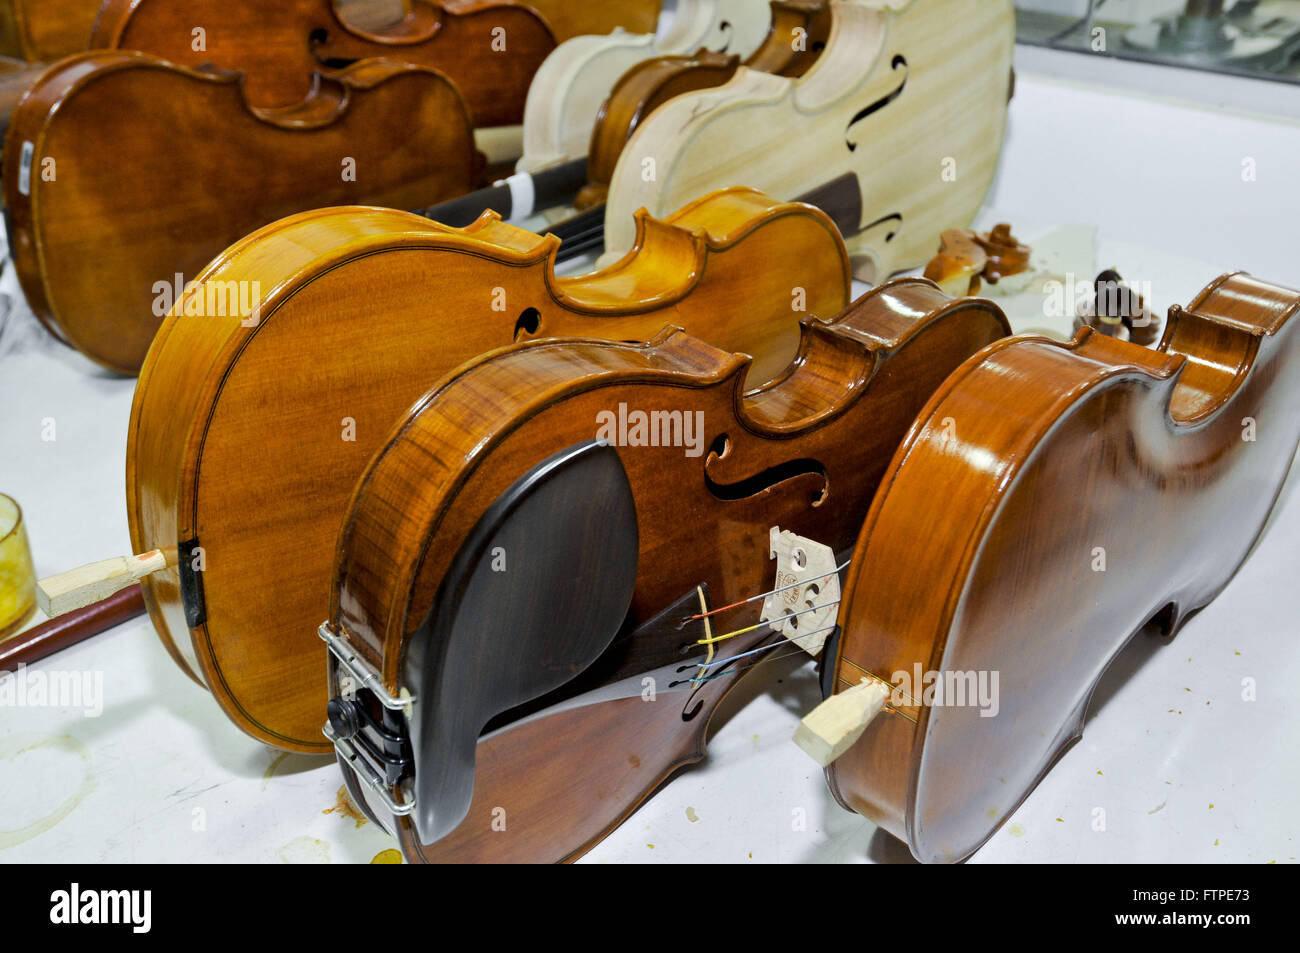 Violins in luteria Workshop - Handmade manufacture of stringed instruments Stock Photo